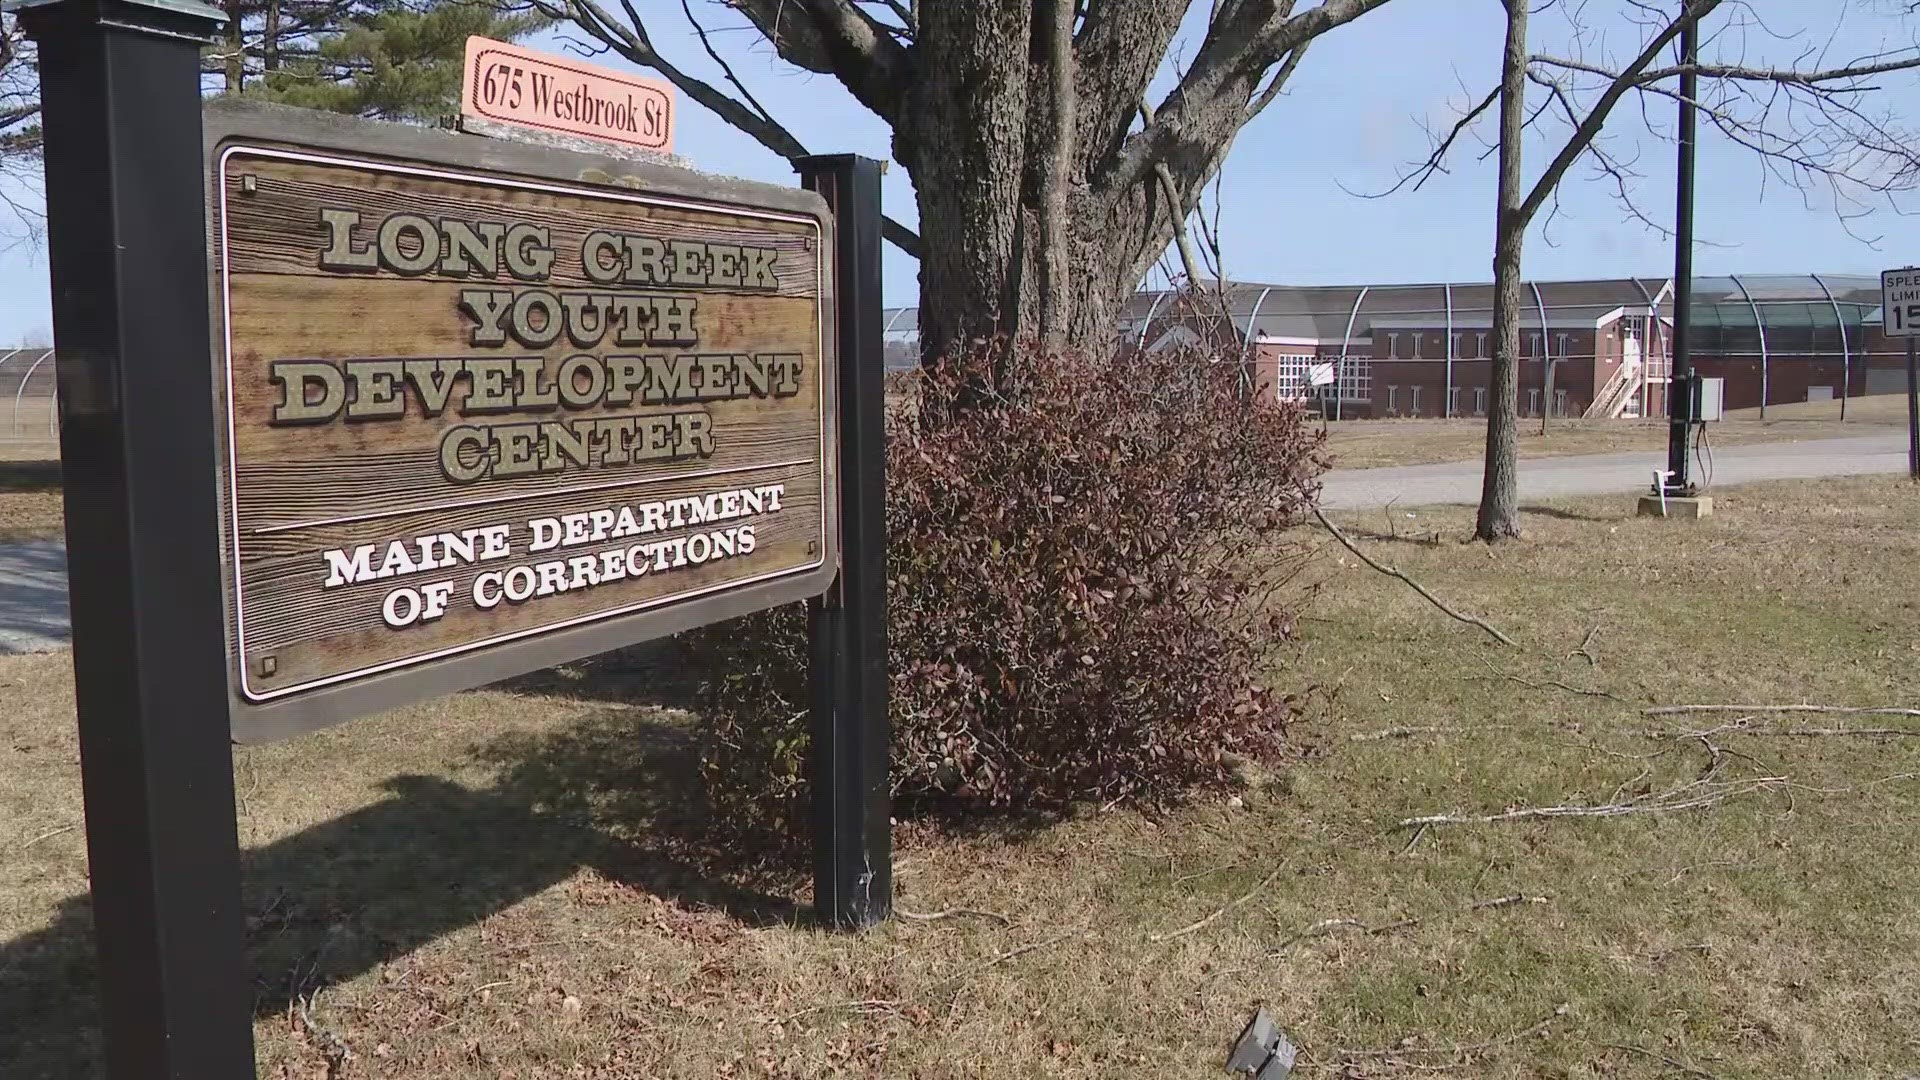 According to the Maine Department of Corrections, Lynne Allen is leaving her position at Long Creek Youth Development Center for personal reasons after two years.